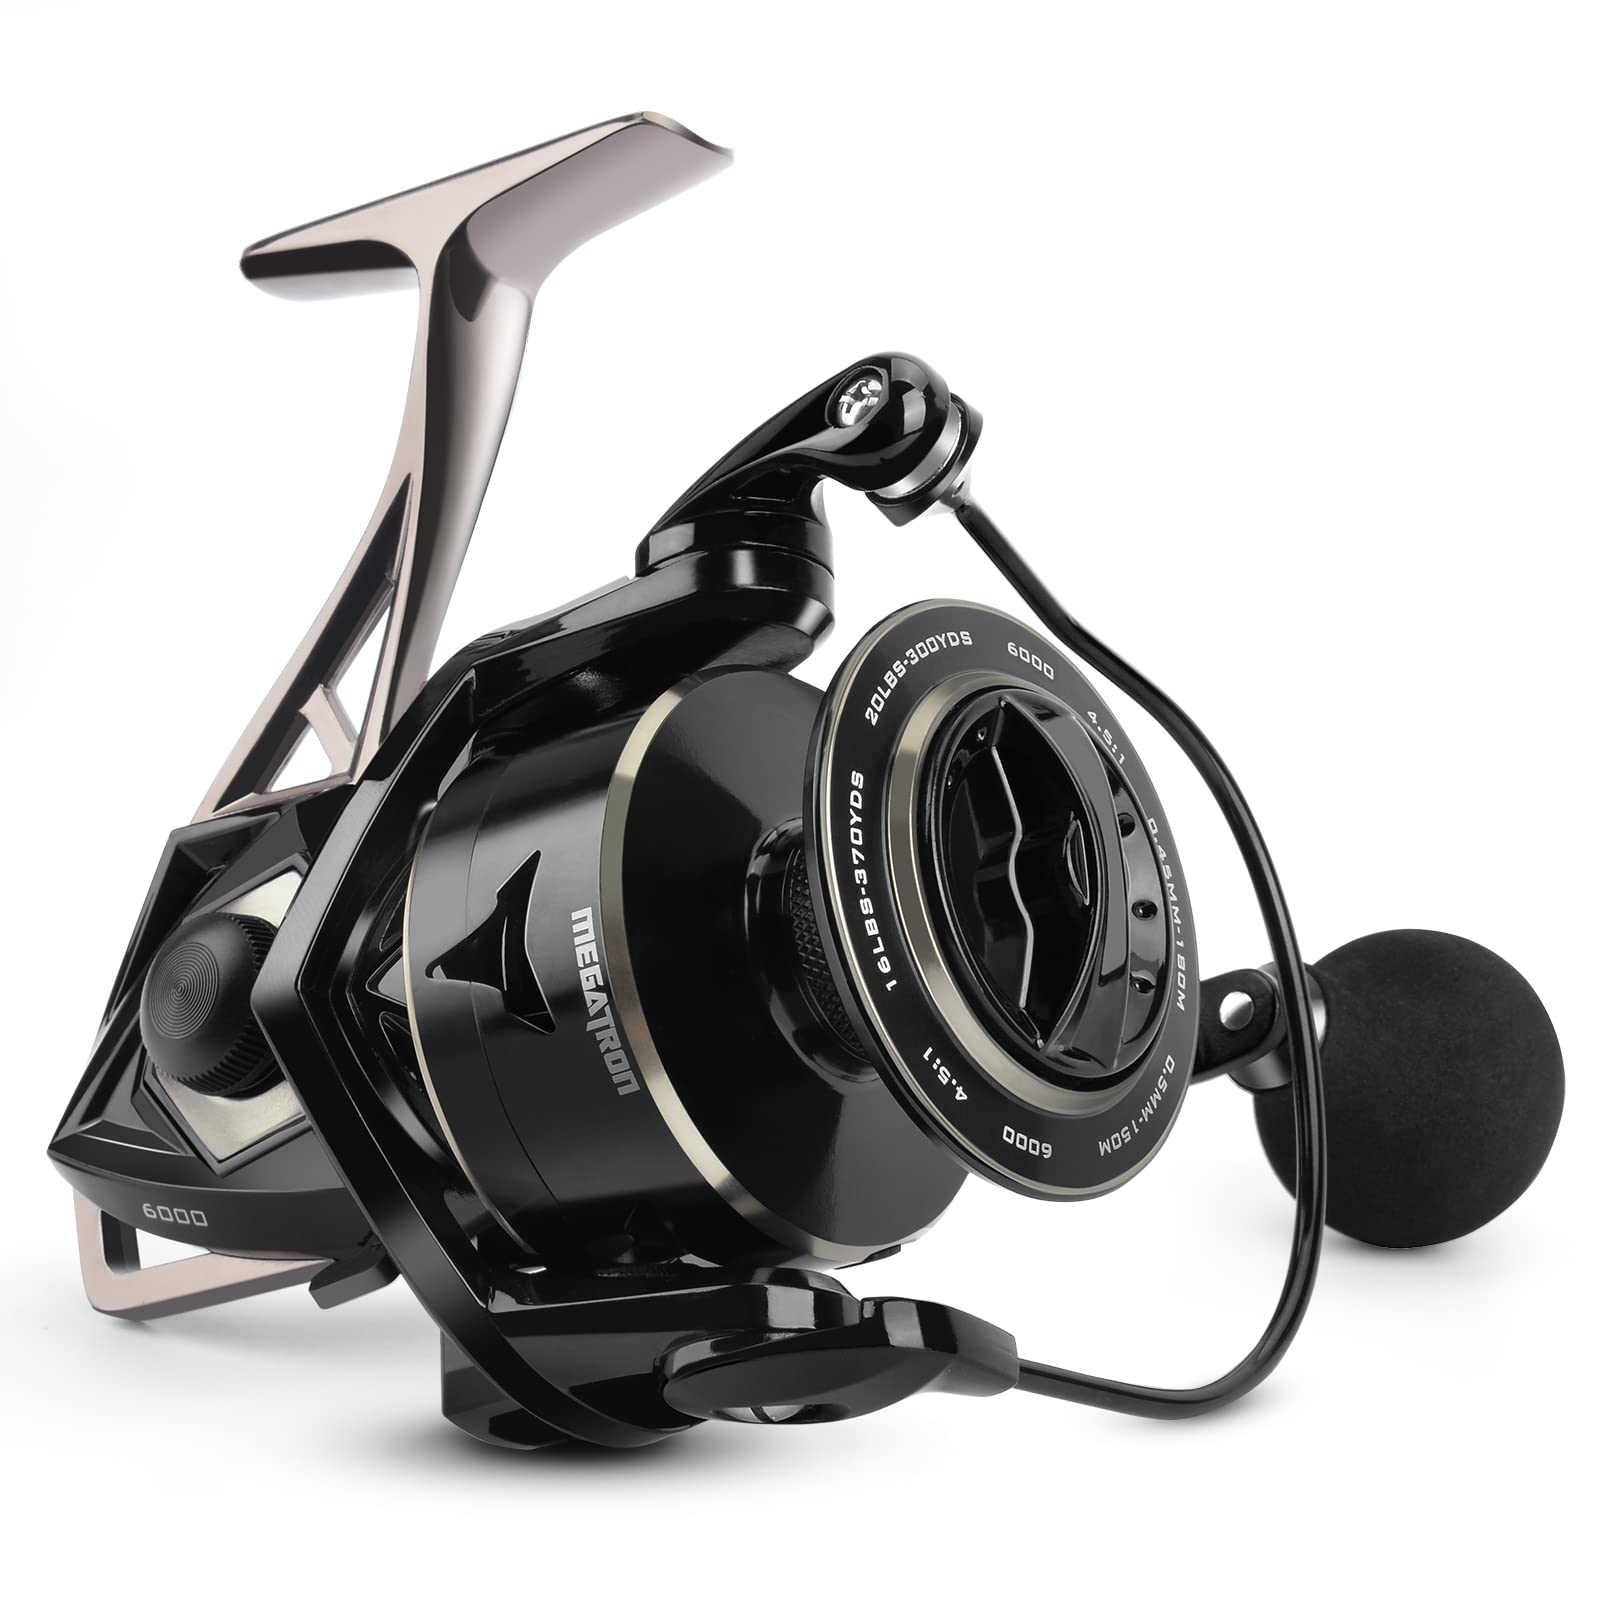 KastKing Megatron Spinning Reel, Freshwater and Saltwater Spinning Fishing  Reel, Rigid Aluminum Frame 7+1 Double-Shielded Stainless-Steel BB, Over 30  lbs. Carbon Drag, CNC Aluminum Spool & Handle 6000